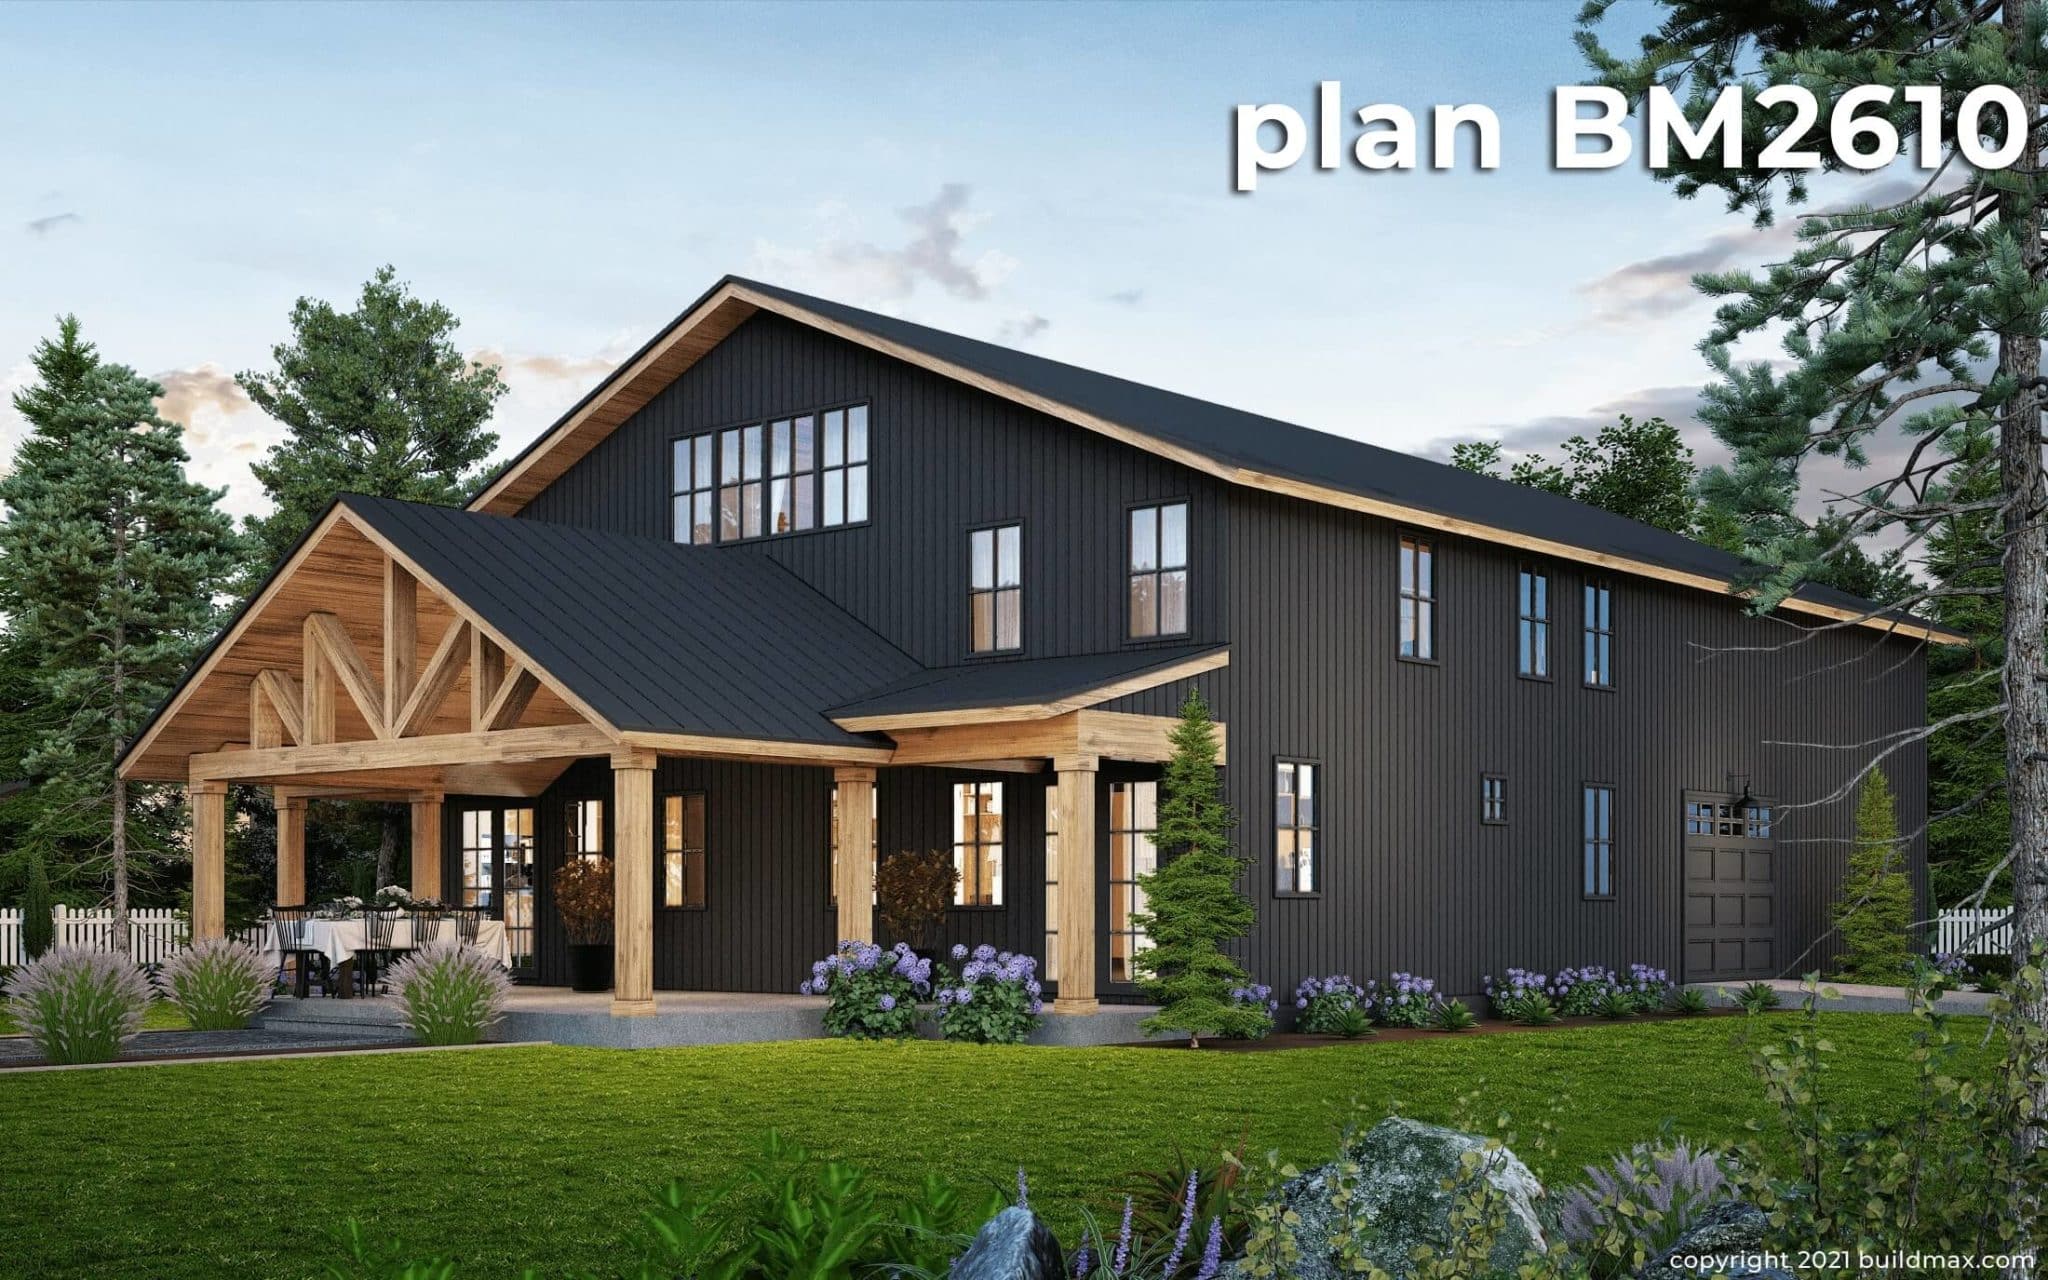 What Is a Barndominium? This Spacious Home Design Is More Popular Than Ever